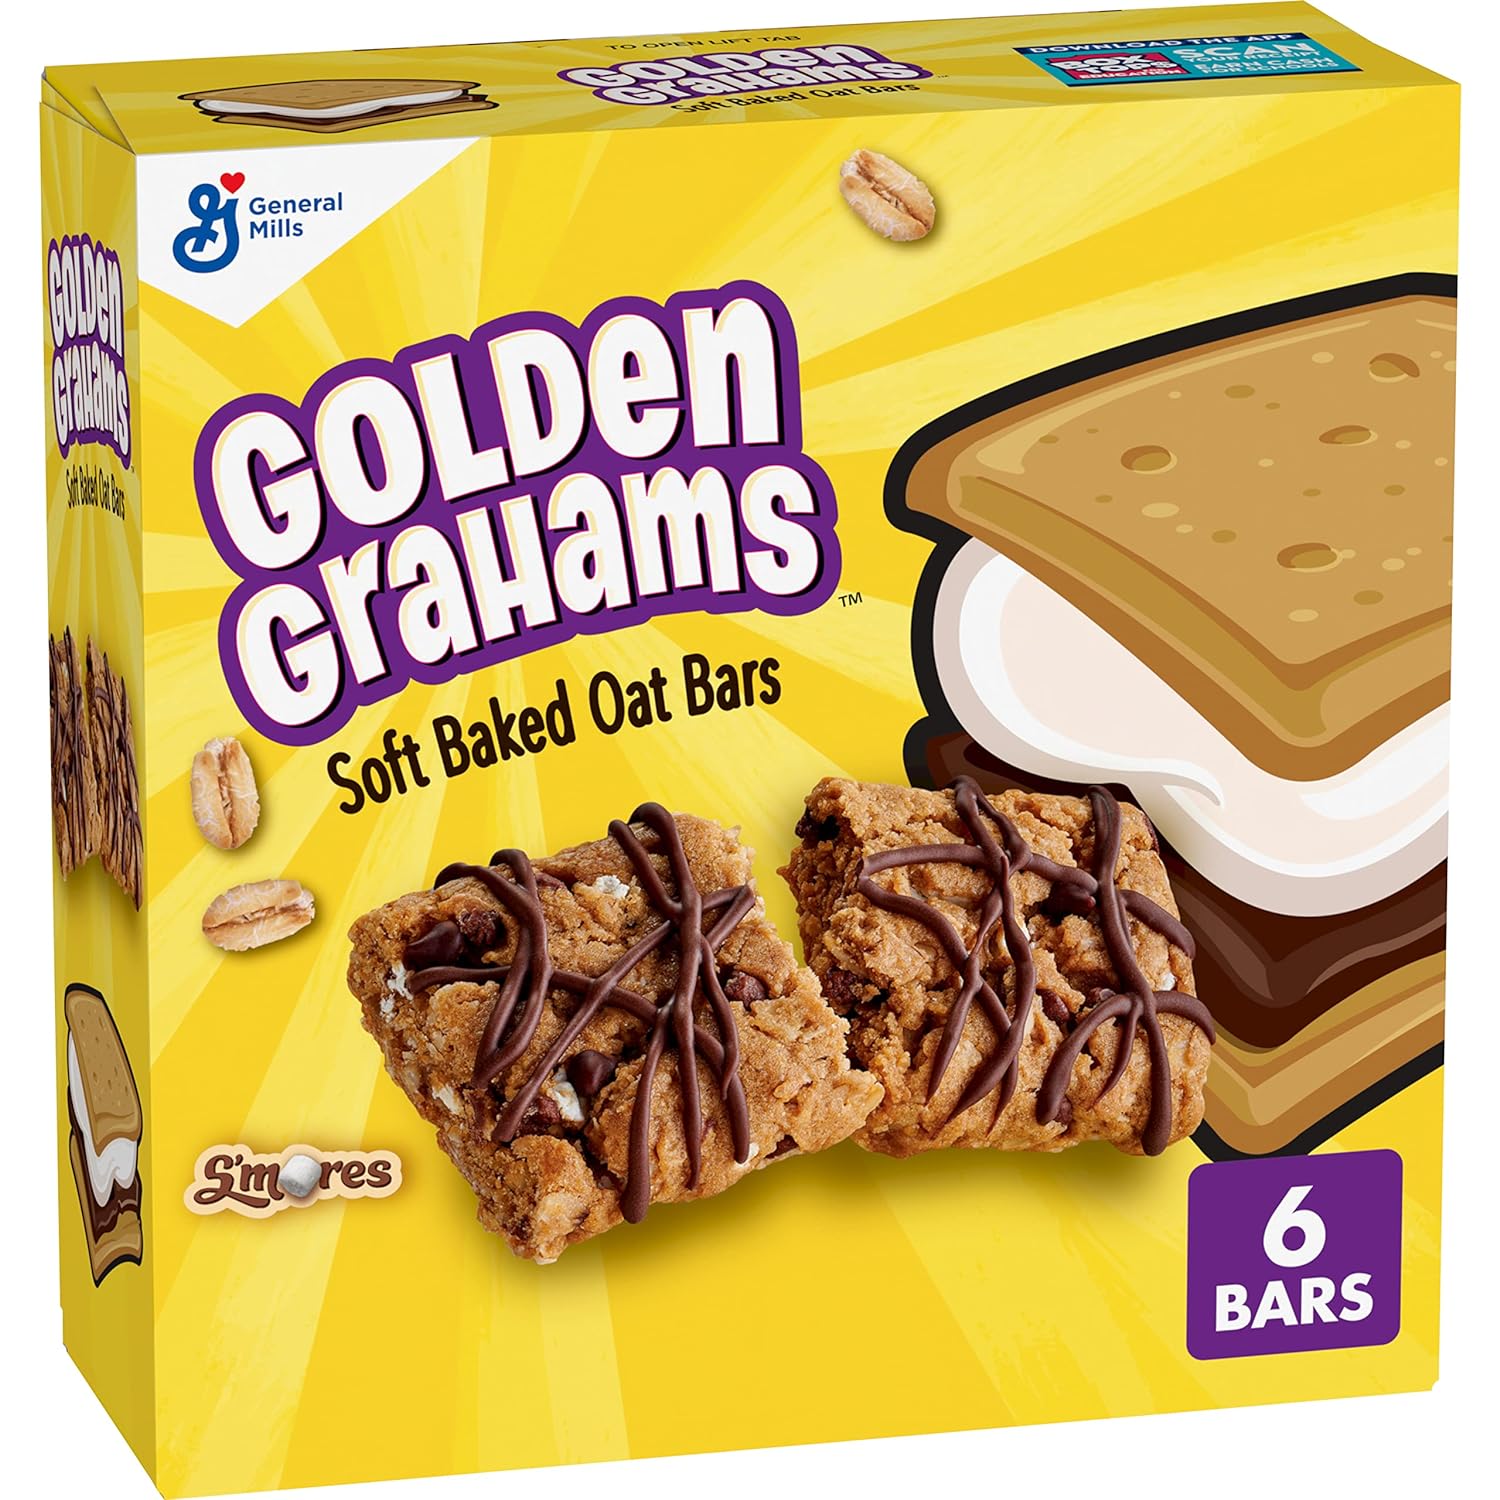 Amazon.com : Golden Grahams S'mores Soft Baked Oat Bars, Chewy Snack Bars, 6 ct : Everything Else $1.95